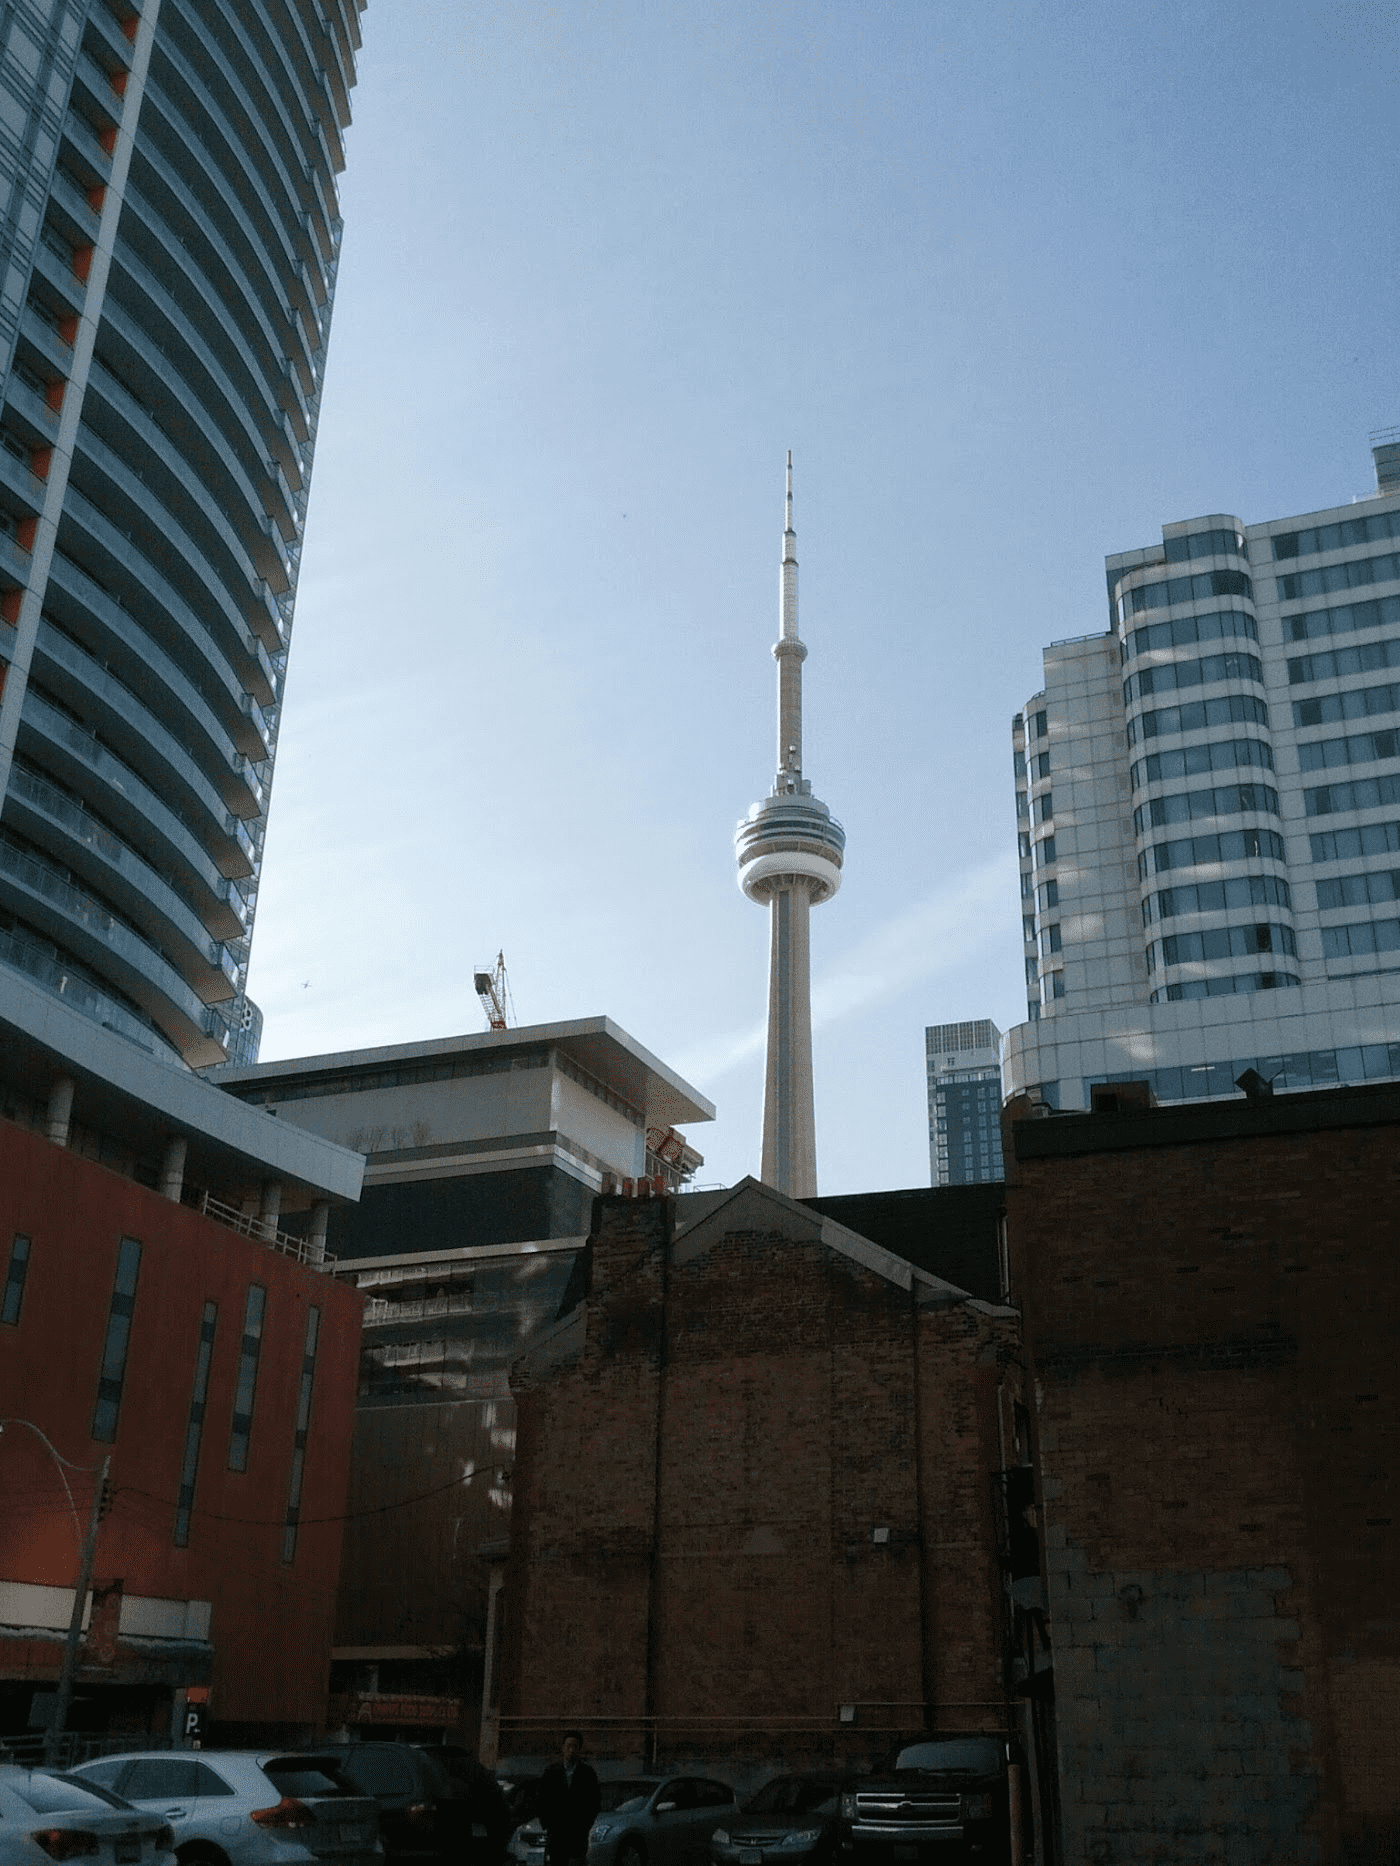 Picture of the CN Tower taken from Adelaide Street in Toronto.